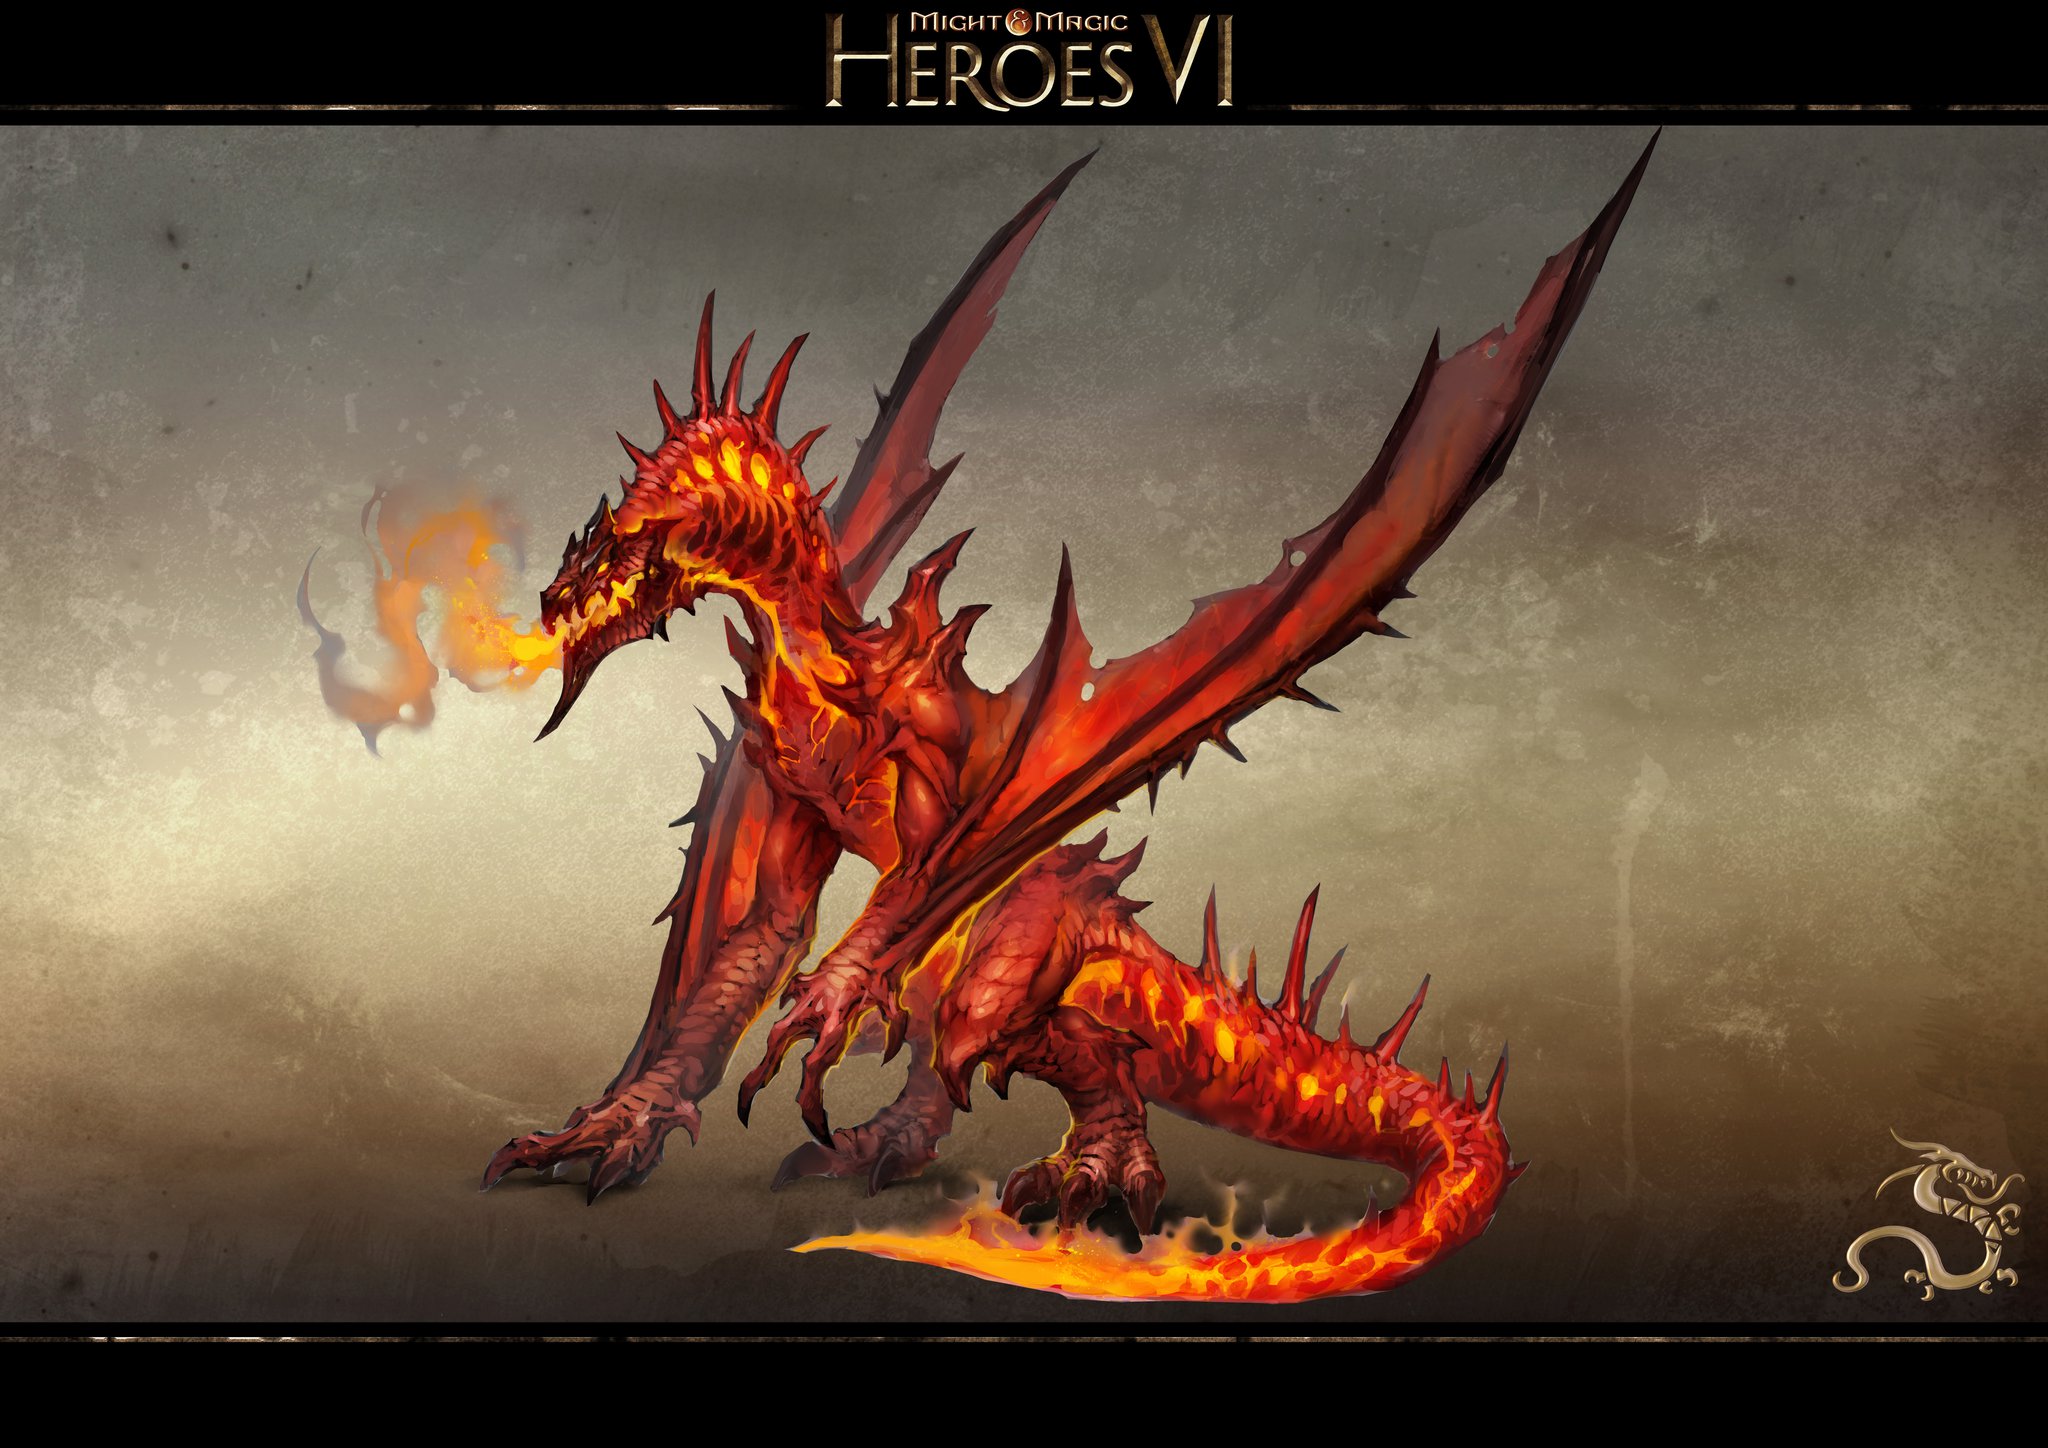   ,                   ,            .           ,                .         ,       ,              .      ARKATH, the Dragon of FIRE      Arkath gathers the Dwarves, grim masters of forge and fire.     The dragon of Fire is rash, hasty, and ill-tempered. Selfish and hot-headed, ferocious in combat, he is ruled by his passions and impulses.